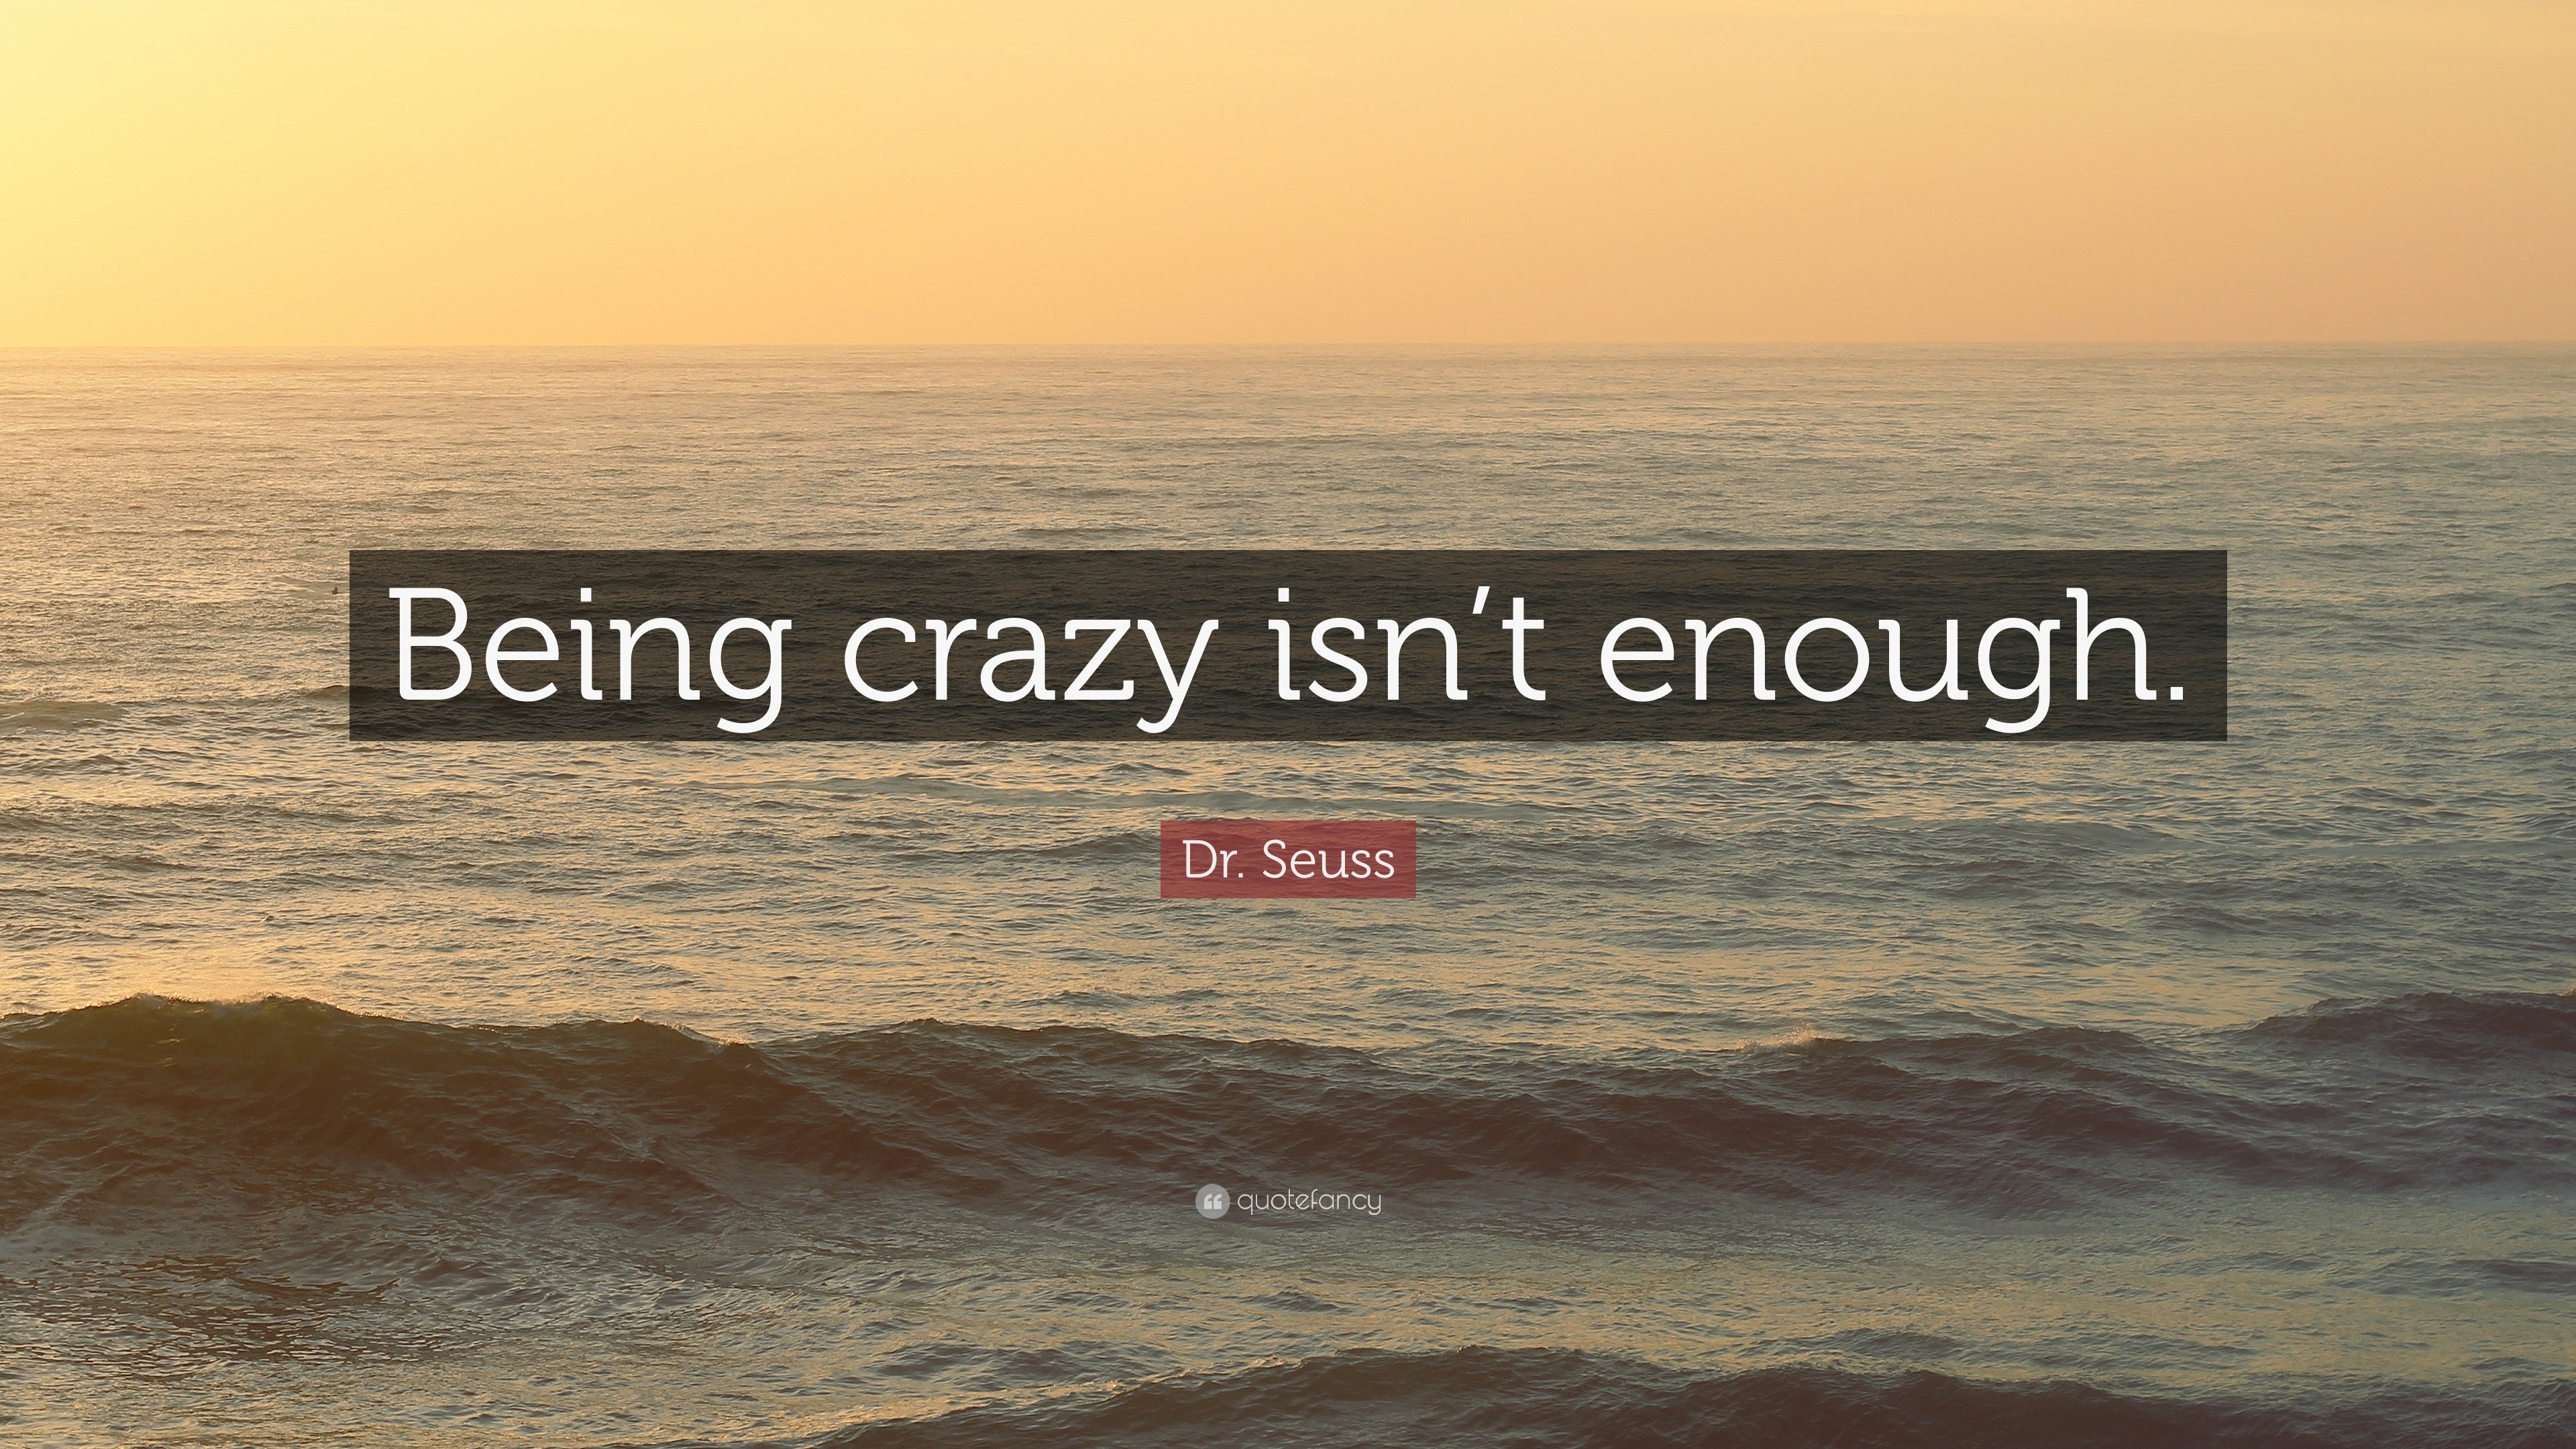 Dr. Seuss Quote: “Being crazy isn’t enough.” (13 wallpapers) - Quotefancy